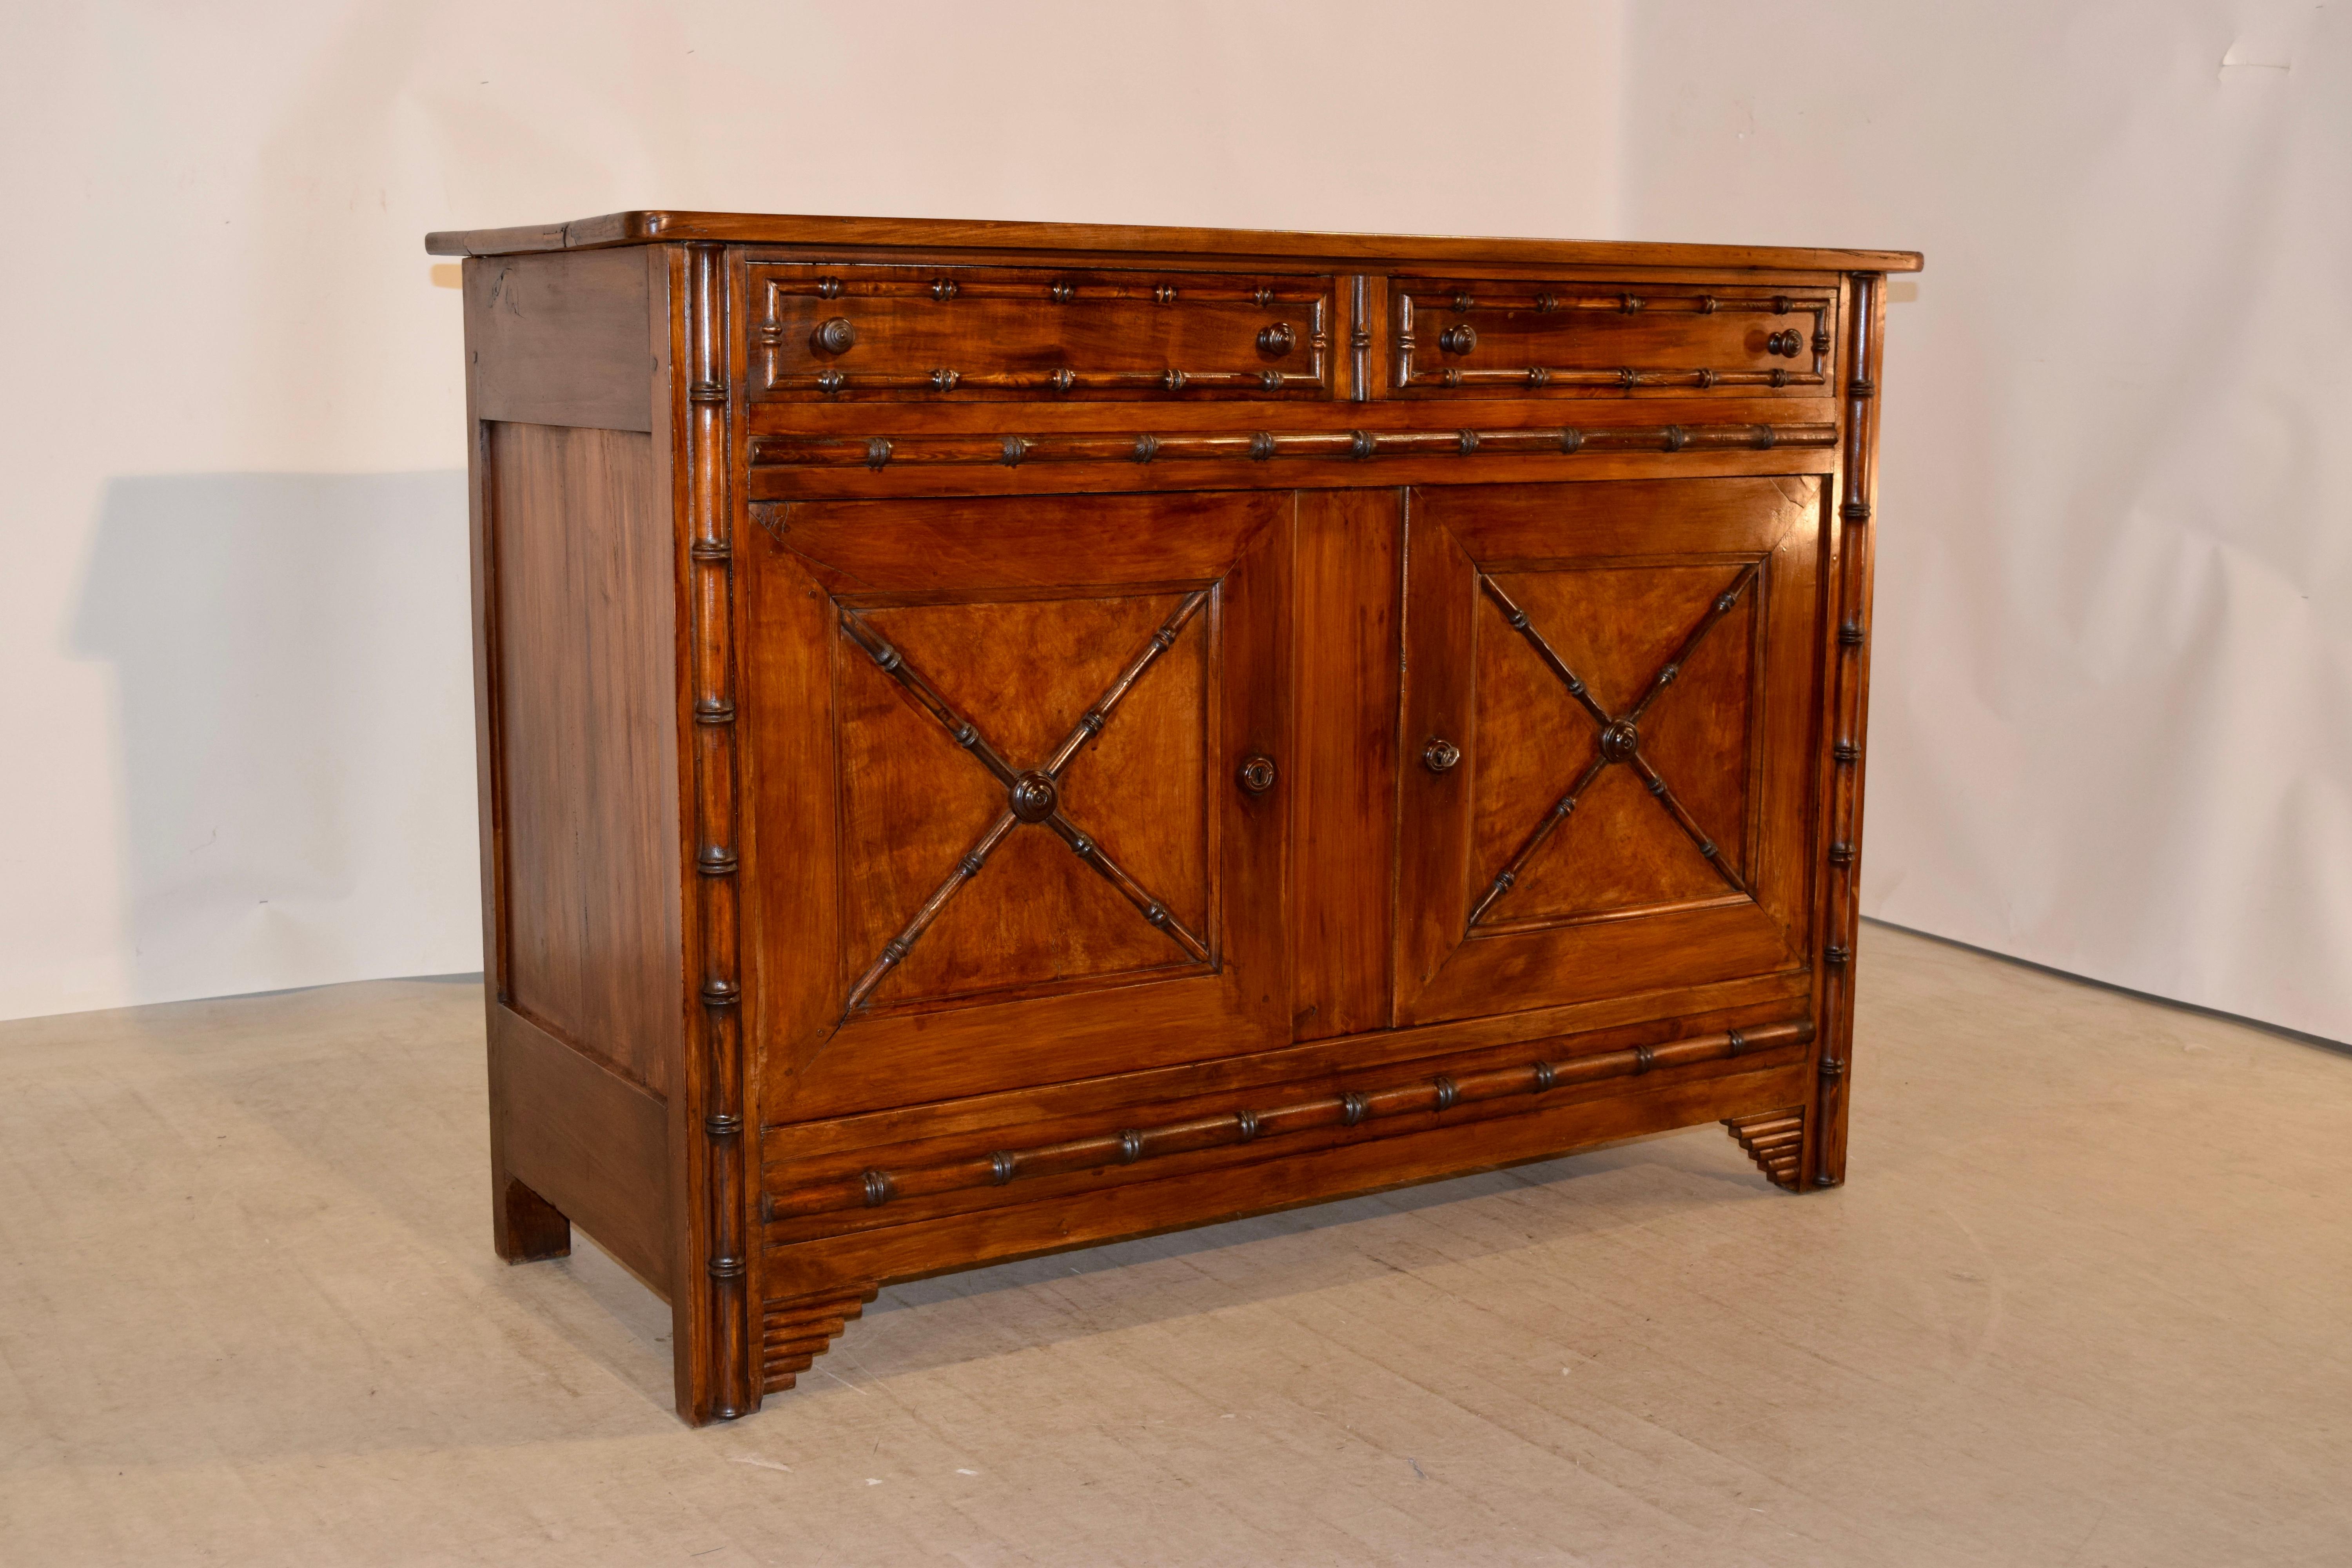 19th century cherry buffet from France with a plank top which has beautifully grained wood, following down to paneled sides and two drawers over two doors in the front. The drawer fronts, doors, and front of the case are decorated with hand-turned